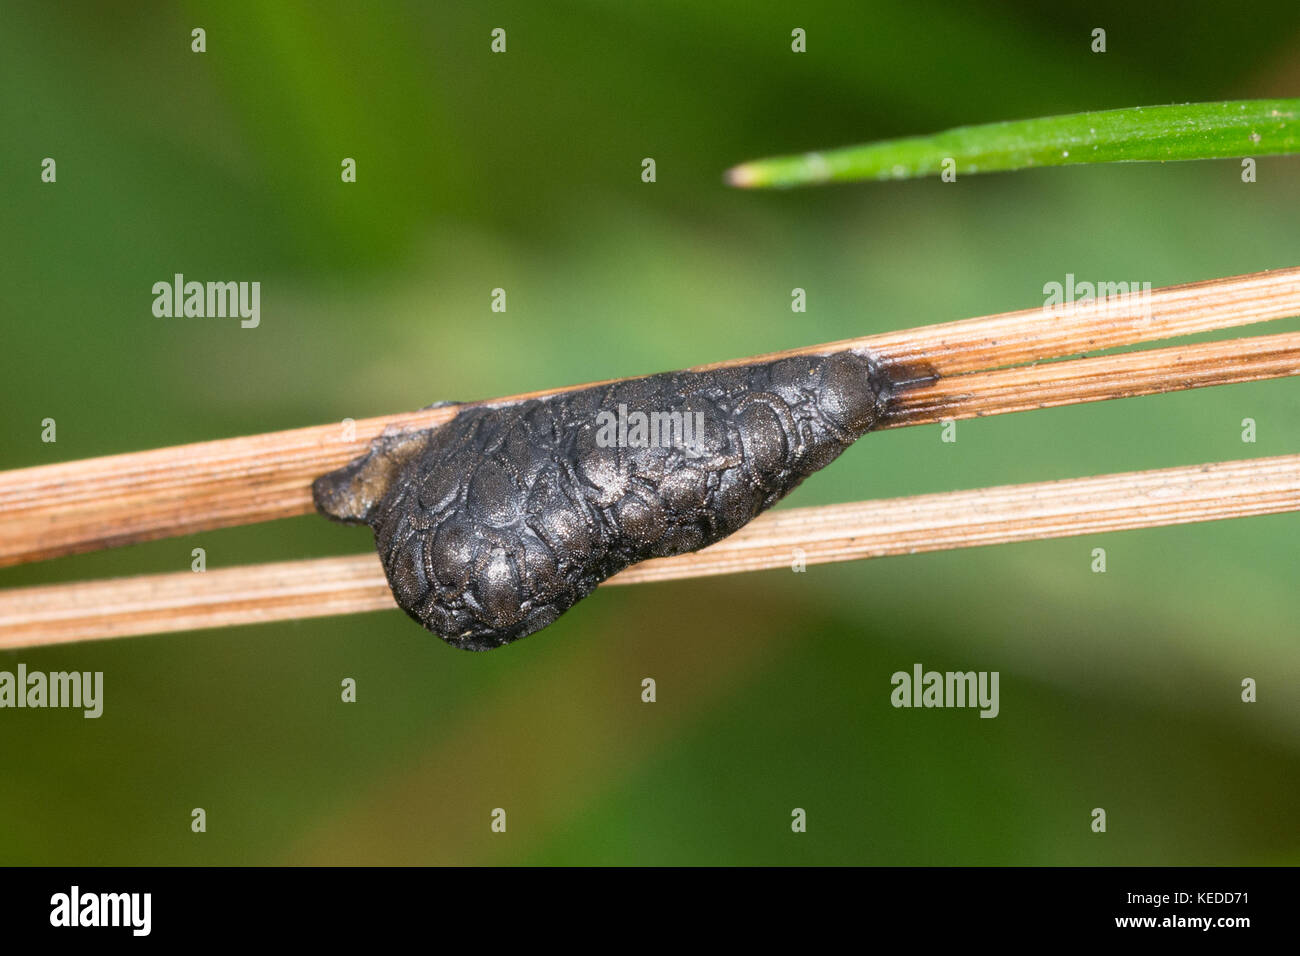 Egg case (ootheca) of the leaf beetle (Galeruca tanaceti) on grass stems at Witley Common, Surrey, UK Stock Photo